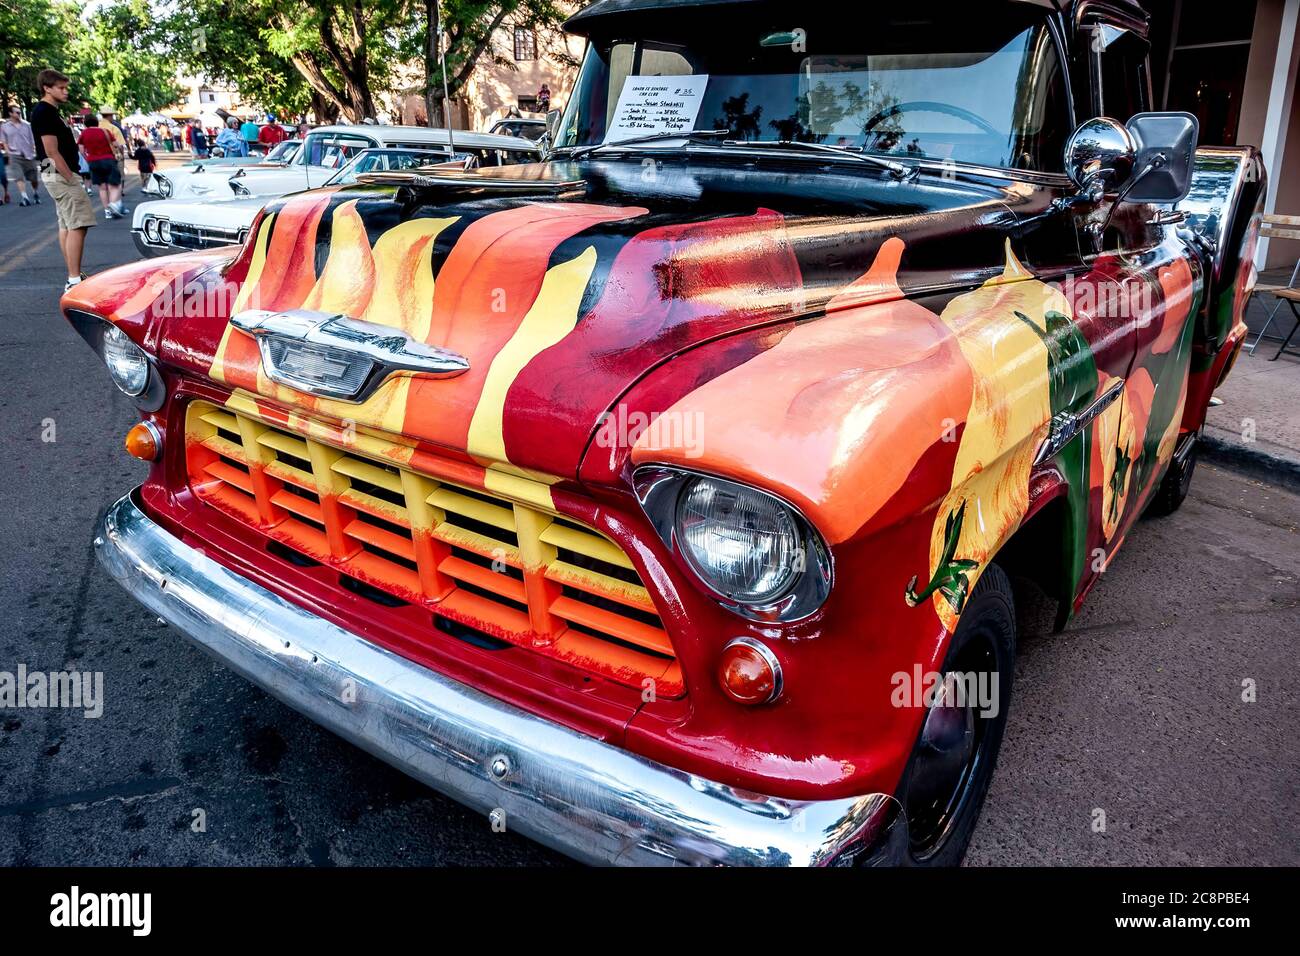 Hot peppers antique Chevy truck, Pancakes on the Plaza 4th of July Celebration, Santa Fe, New Mexico USA Stock Photo